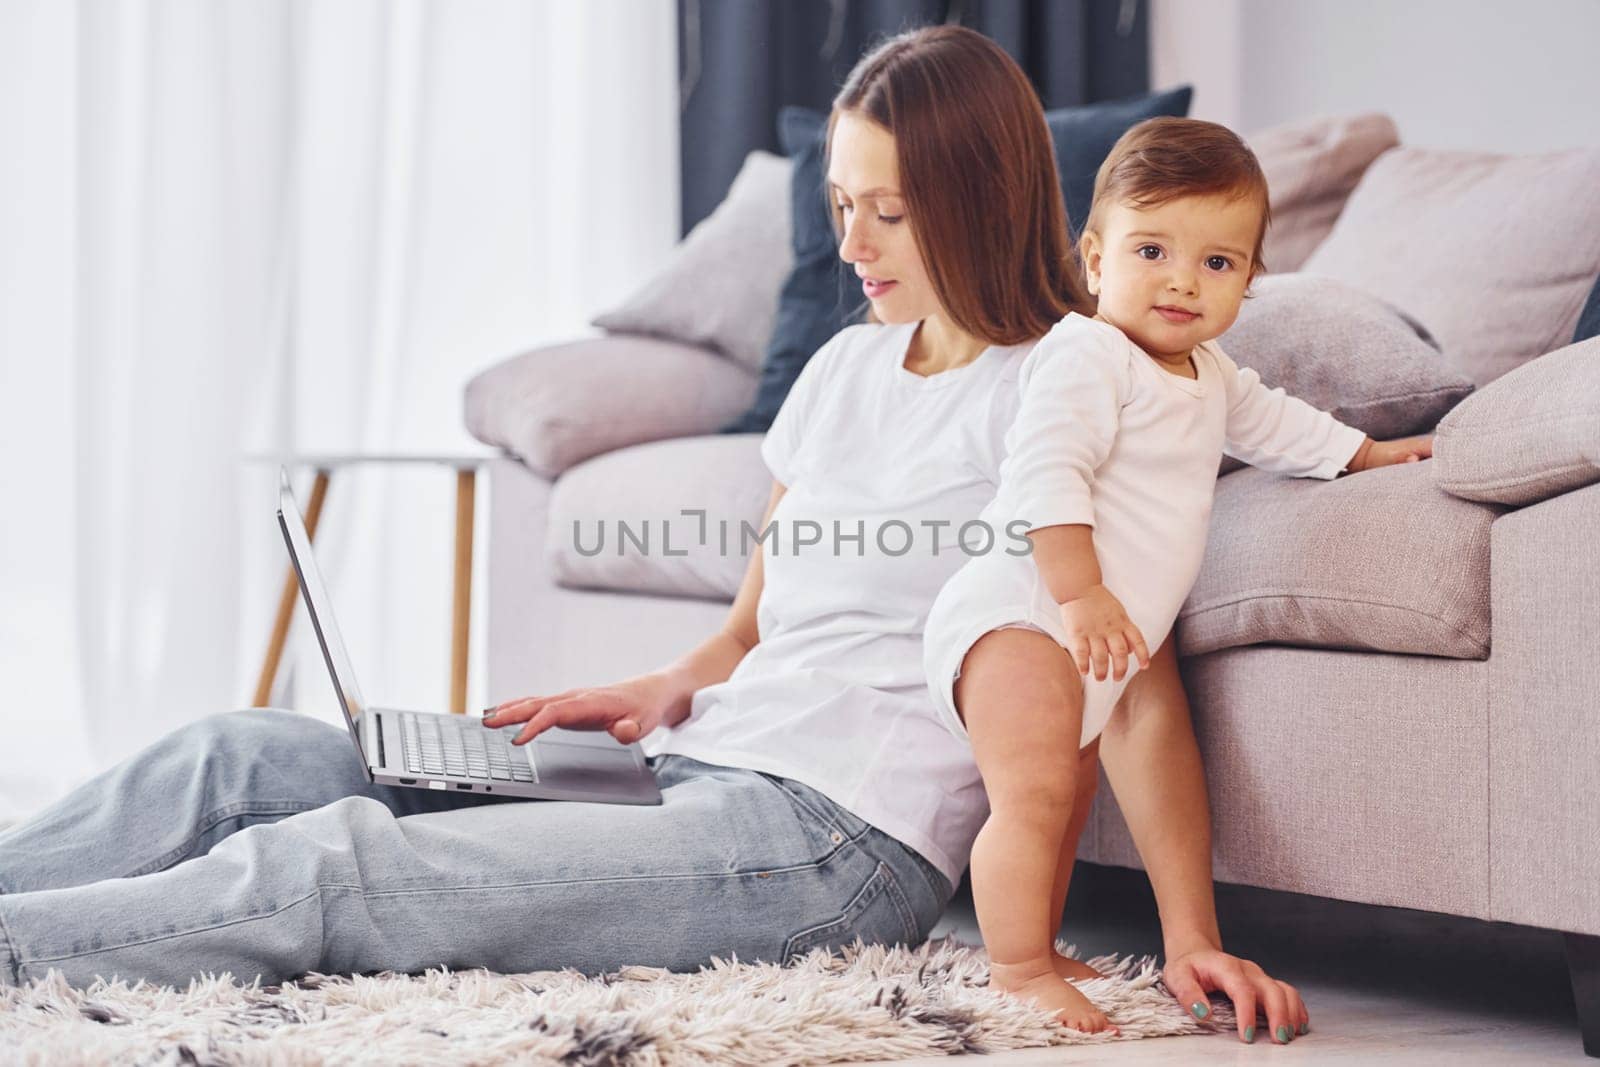 Woman working by using laptop. Mother with her little daughter is indoors at home together.